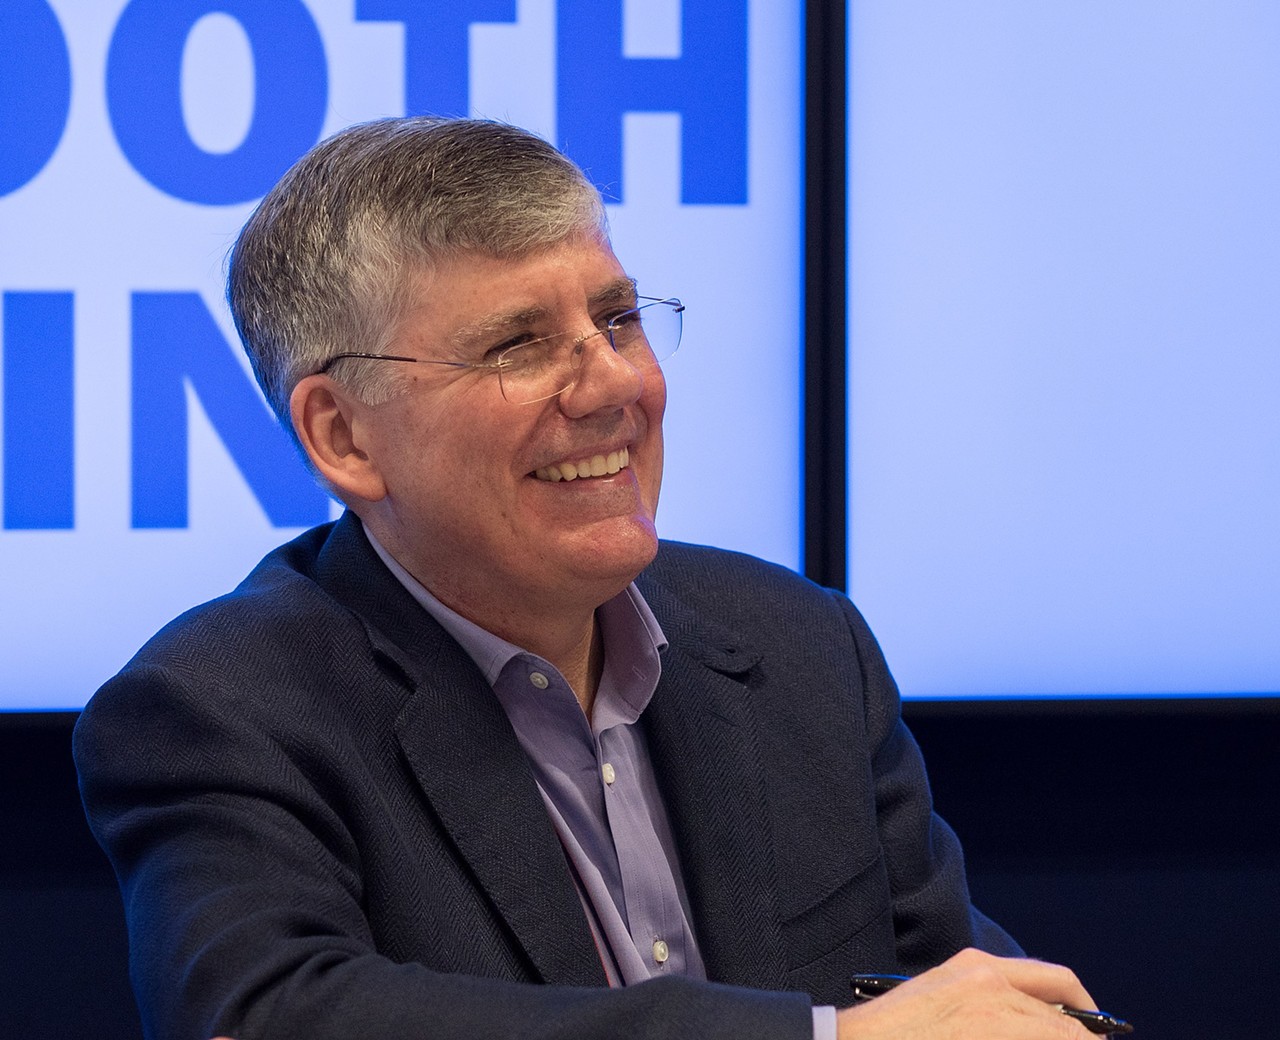 Rick Riordan, Alamo Heights High School
You may know Rick Riordan for his Percy Jackson and the Olympians book series, but did you know the author's a tried and true San Antonian? Born and raised in the Alamo City, Riordan went to Alamo Heights High School before heading to college at North Texas State University (now UNT). He transferred to UT Austin to study English and History, then came back to San Antonio and nabbed a teaching certification at UTSA.
Photo via Wikimedia Commons / Rhododendrites